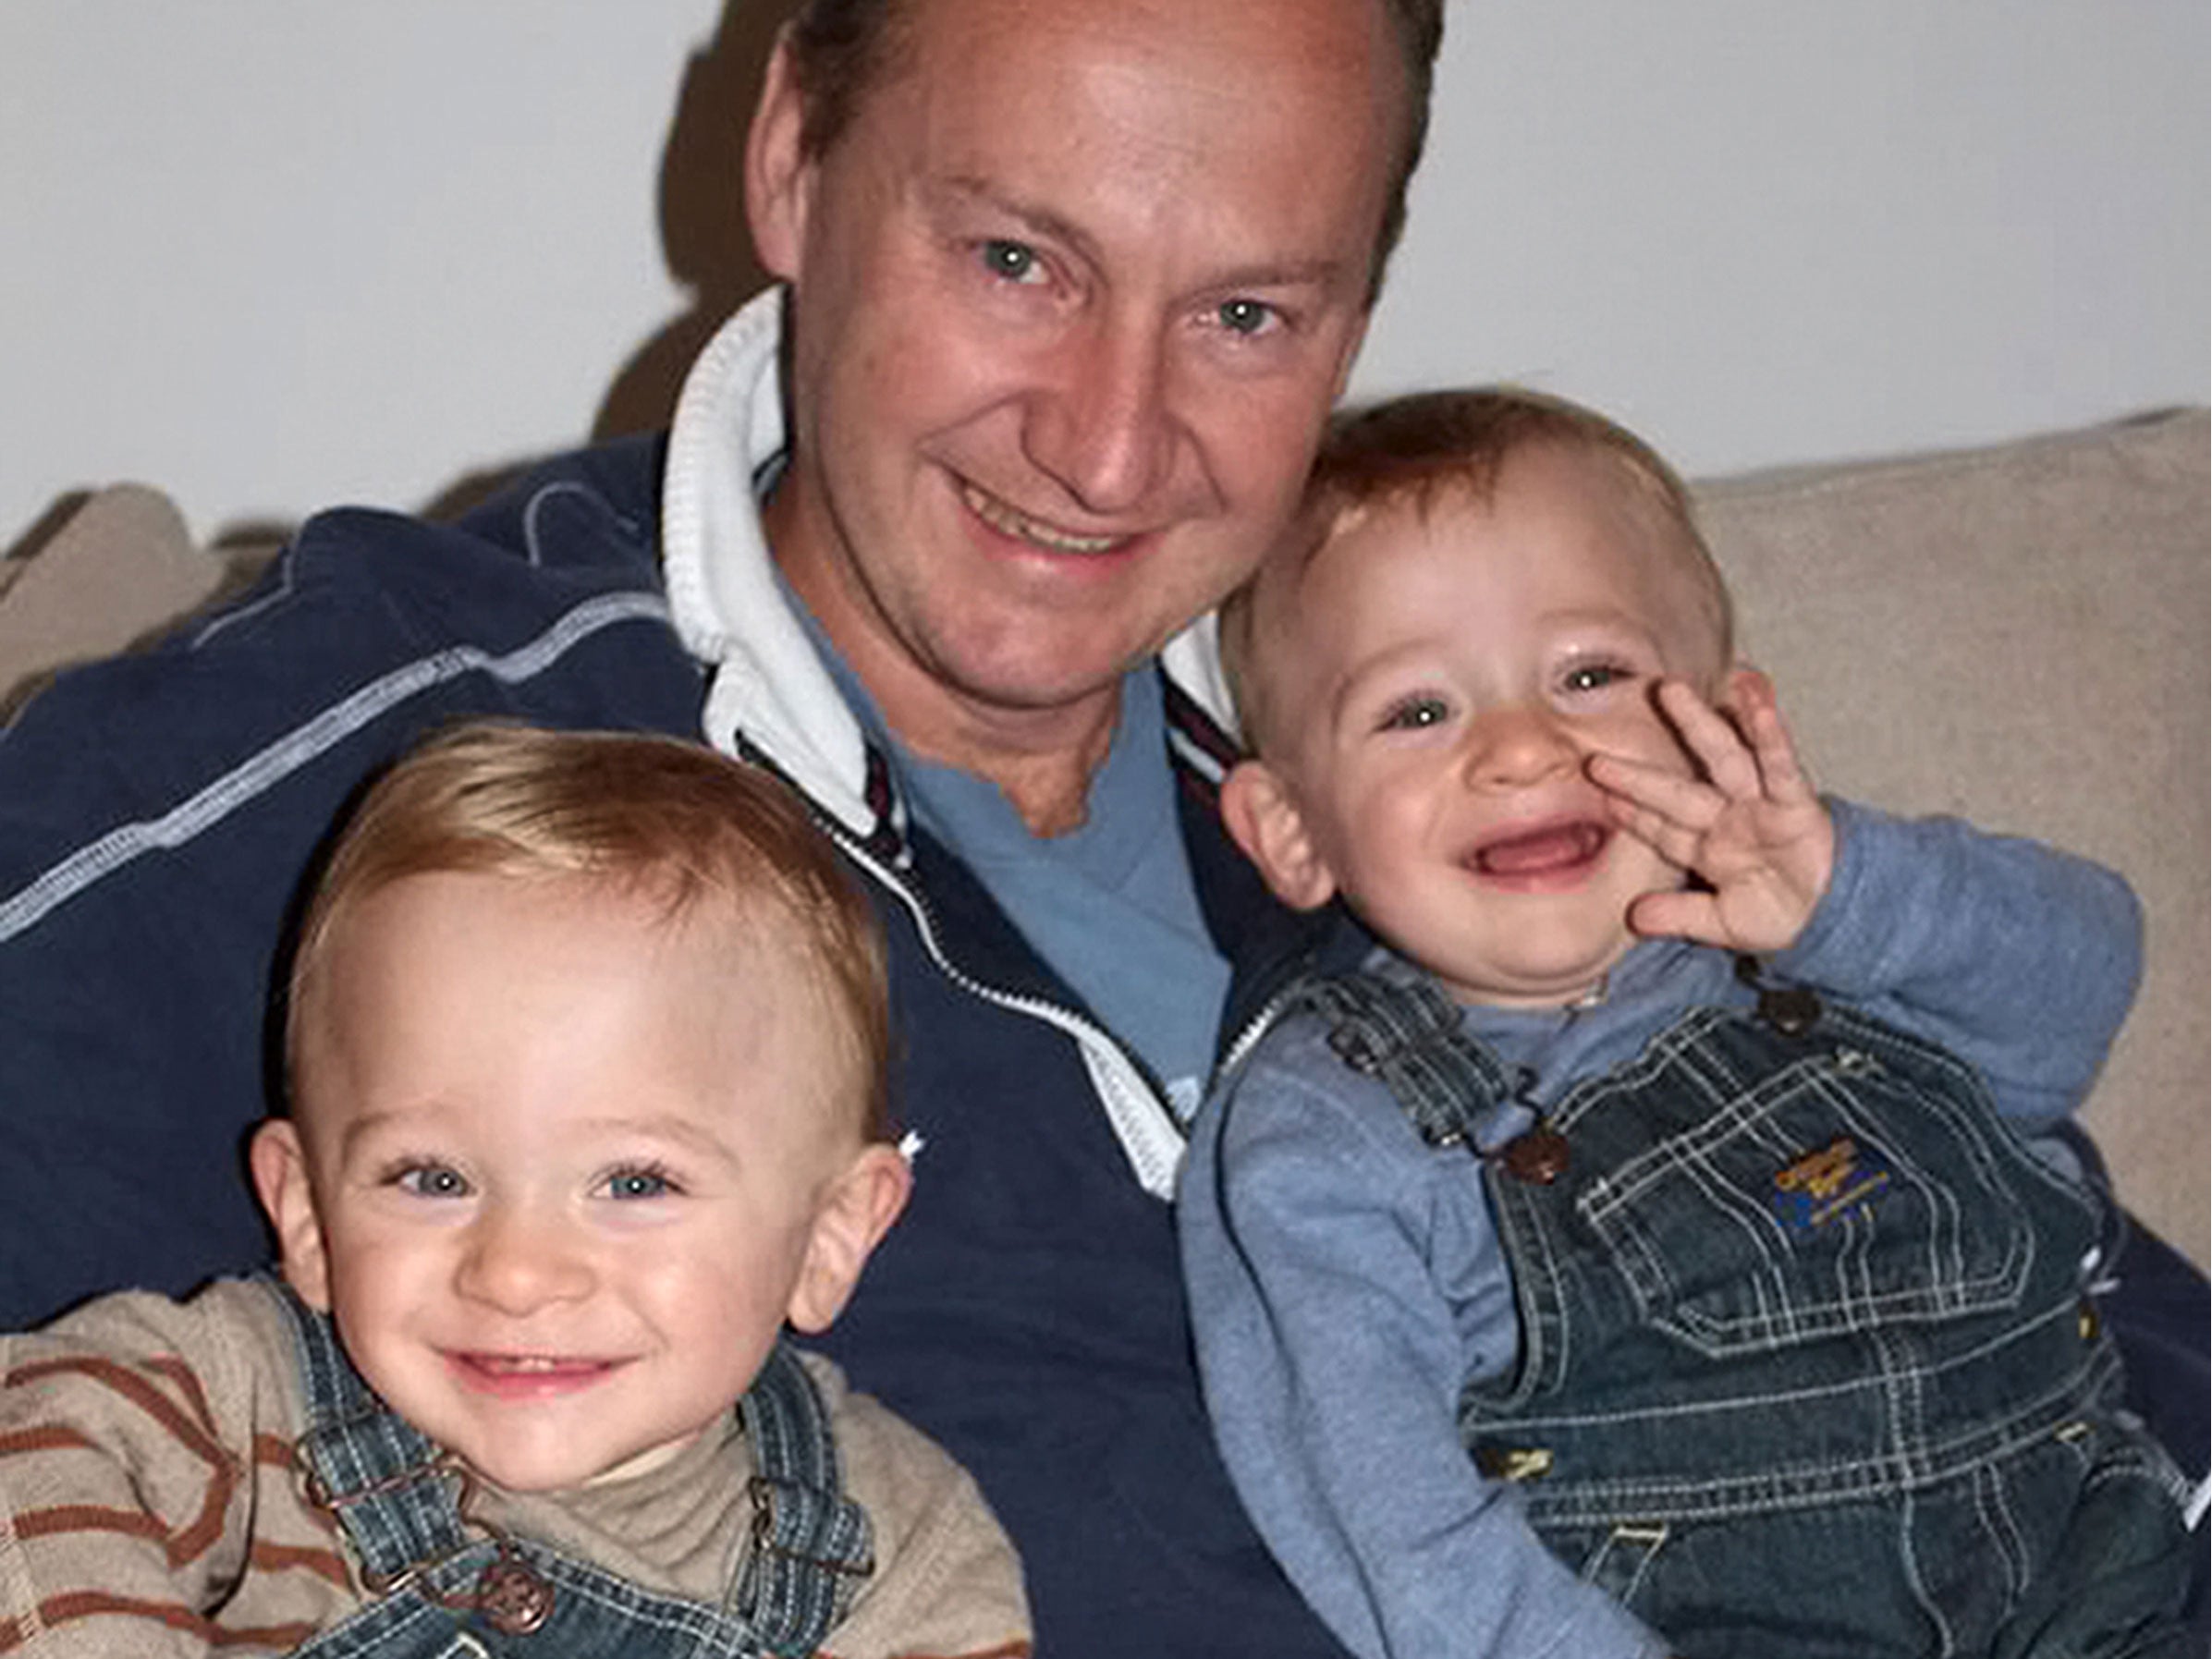 Investment banker Gary Clarence, pictured with his twin three-year-old sons Max and Ben